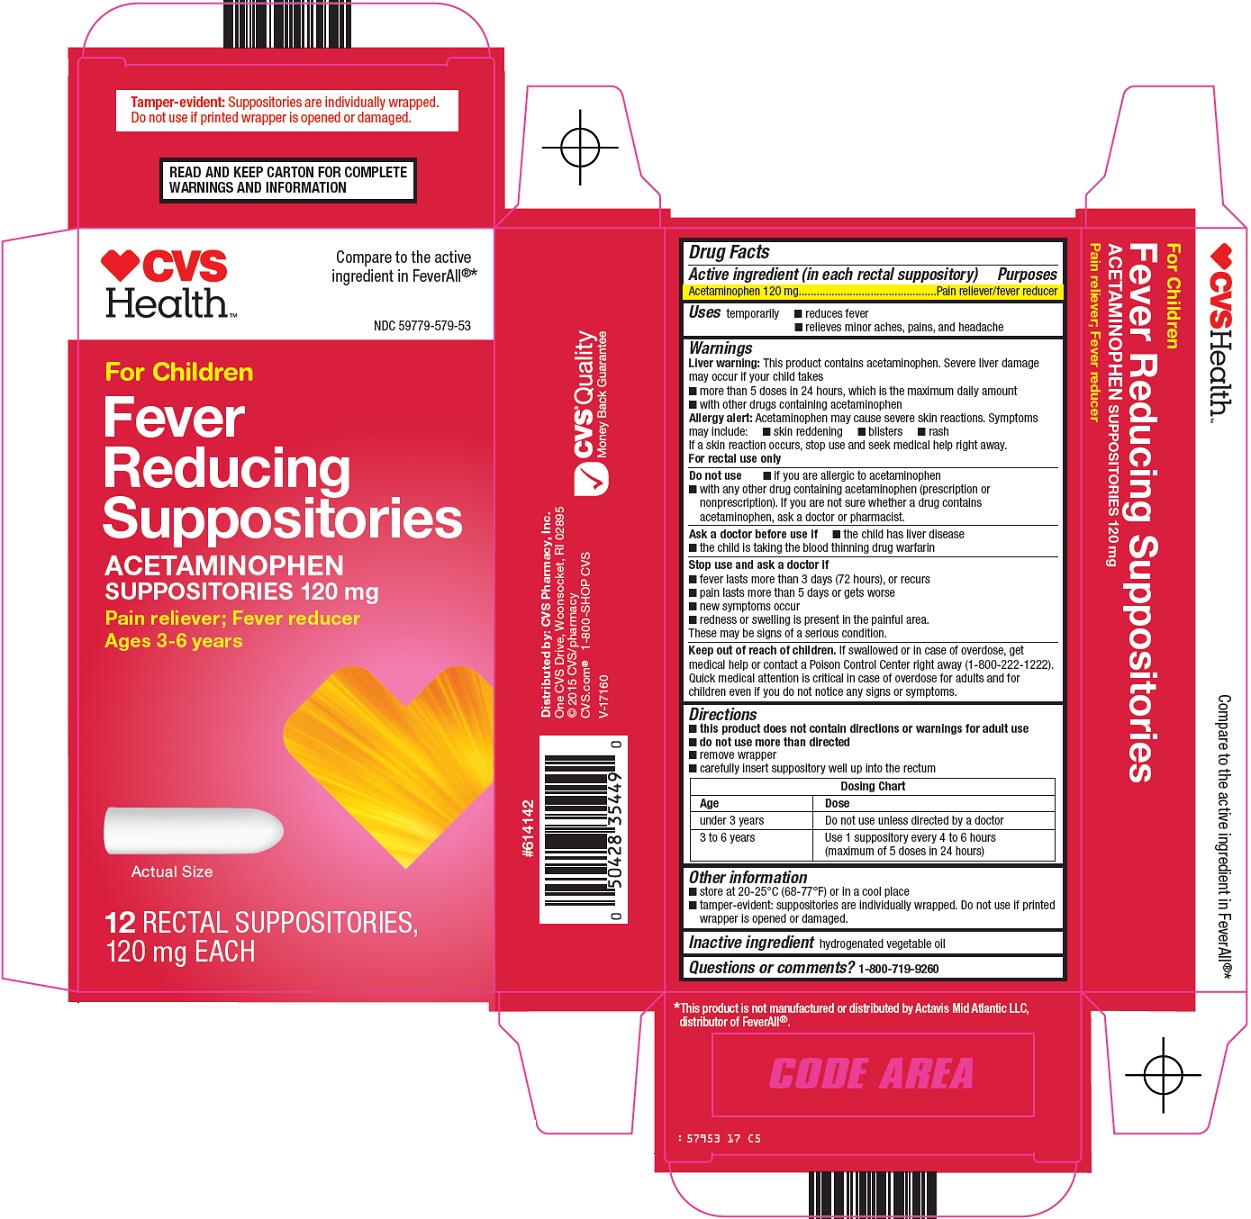 Fever Reducing Suppositories Image